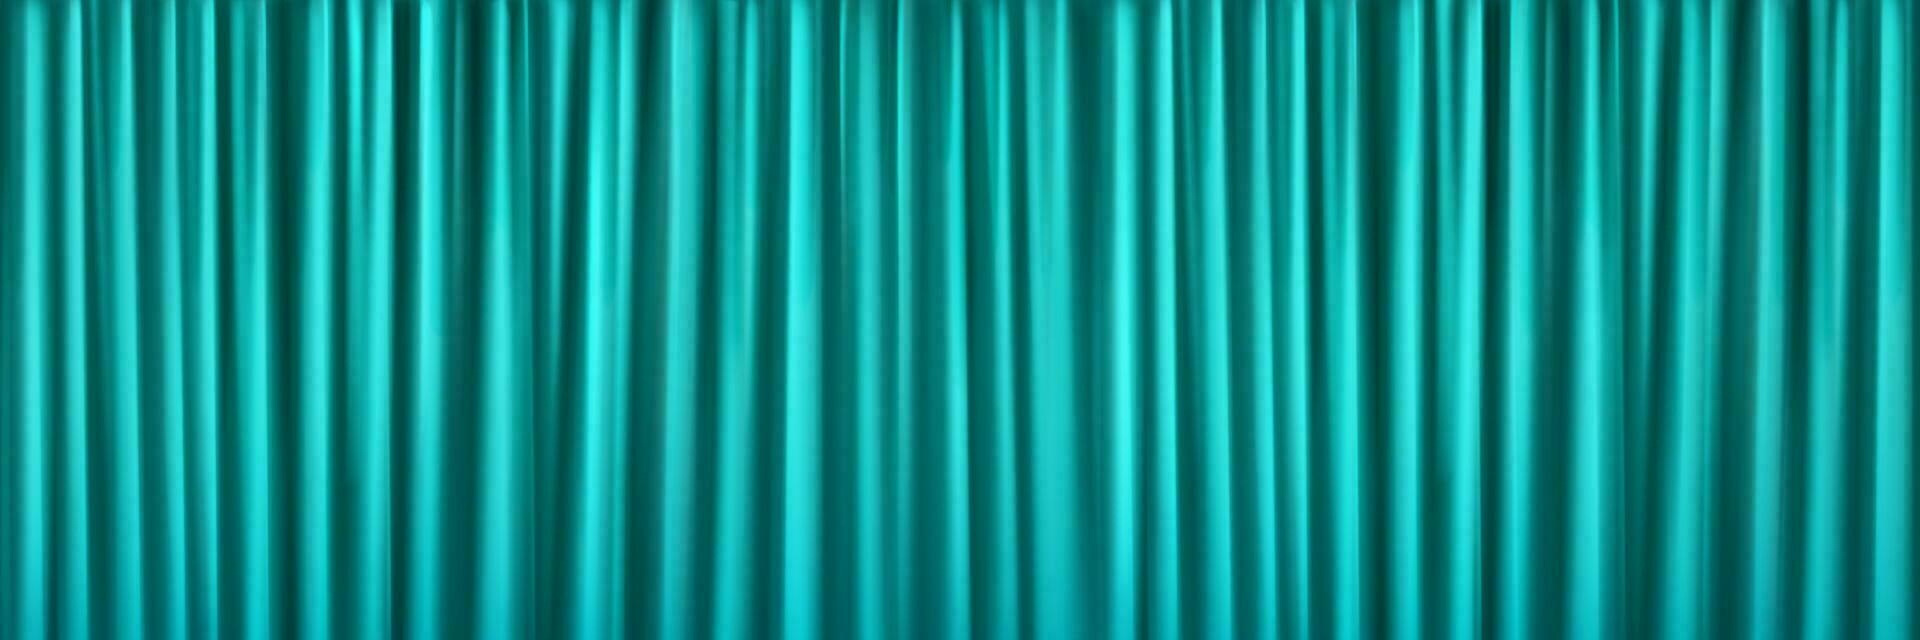 Realistic turquoise curtain background vector